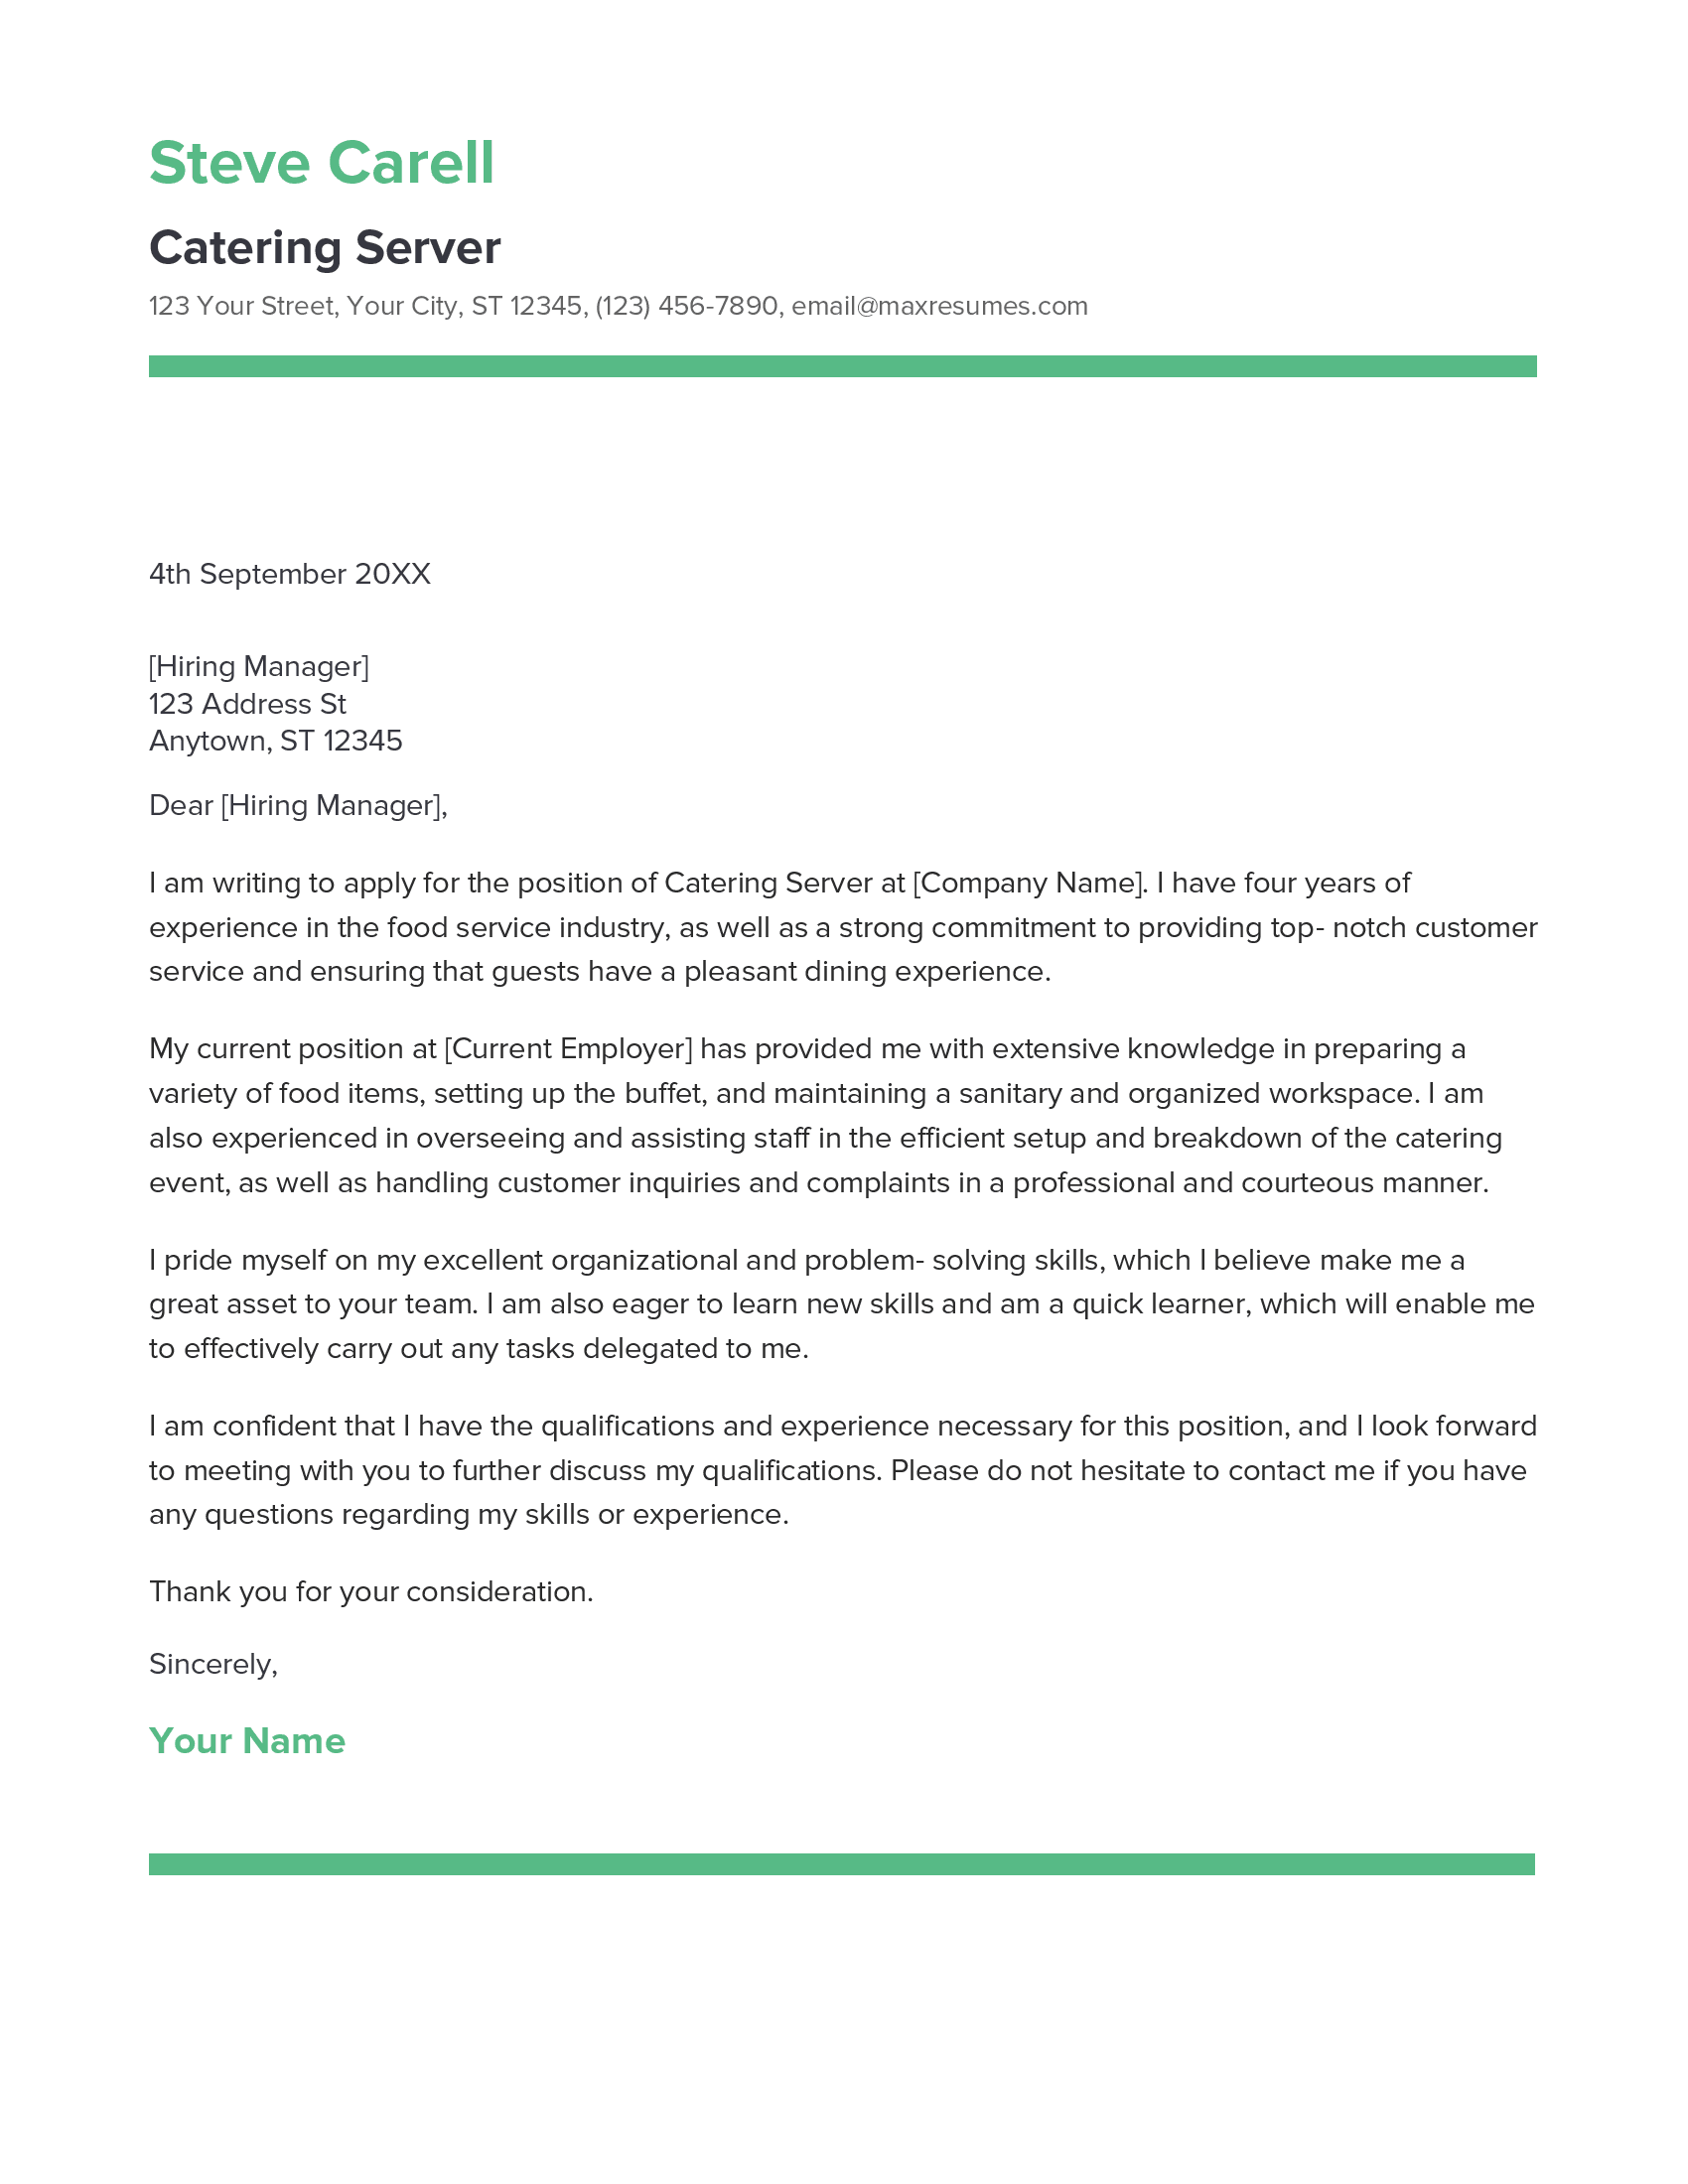 Catering Server Cover Letter Example